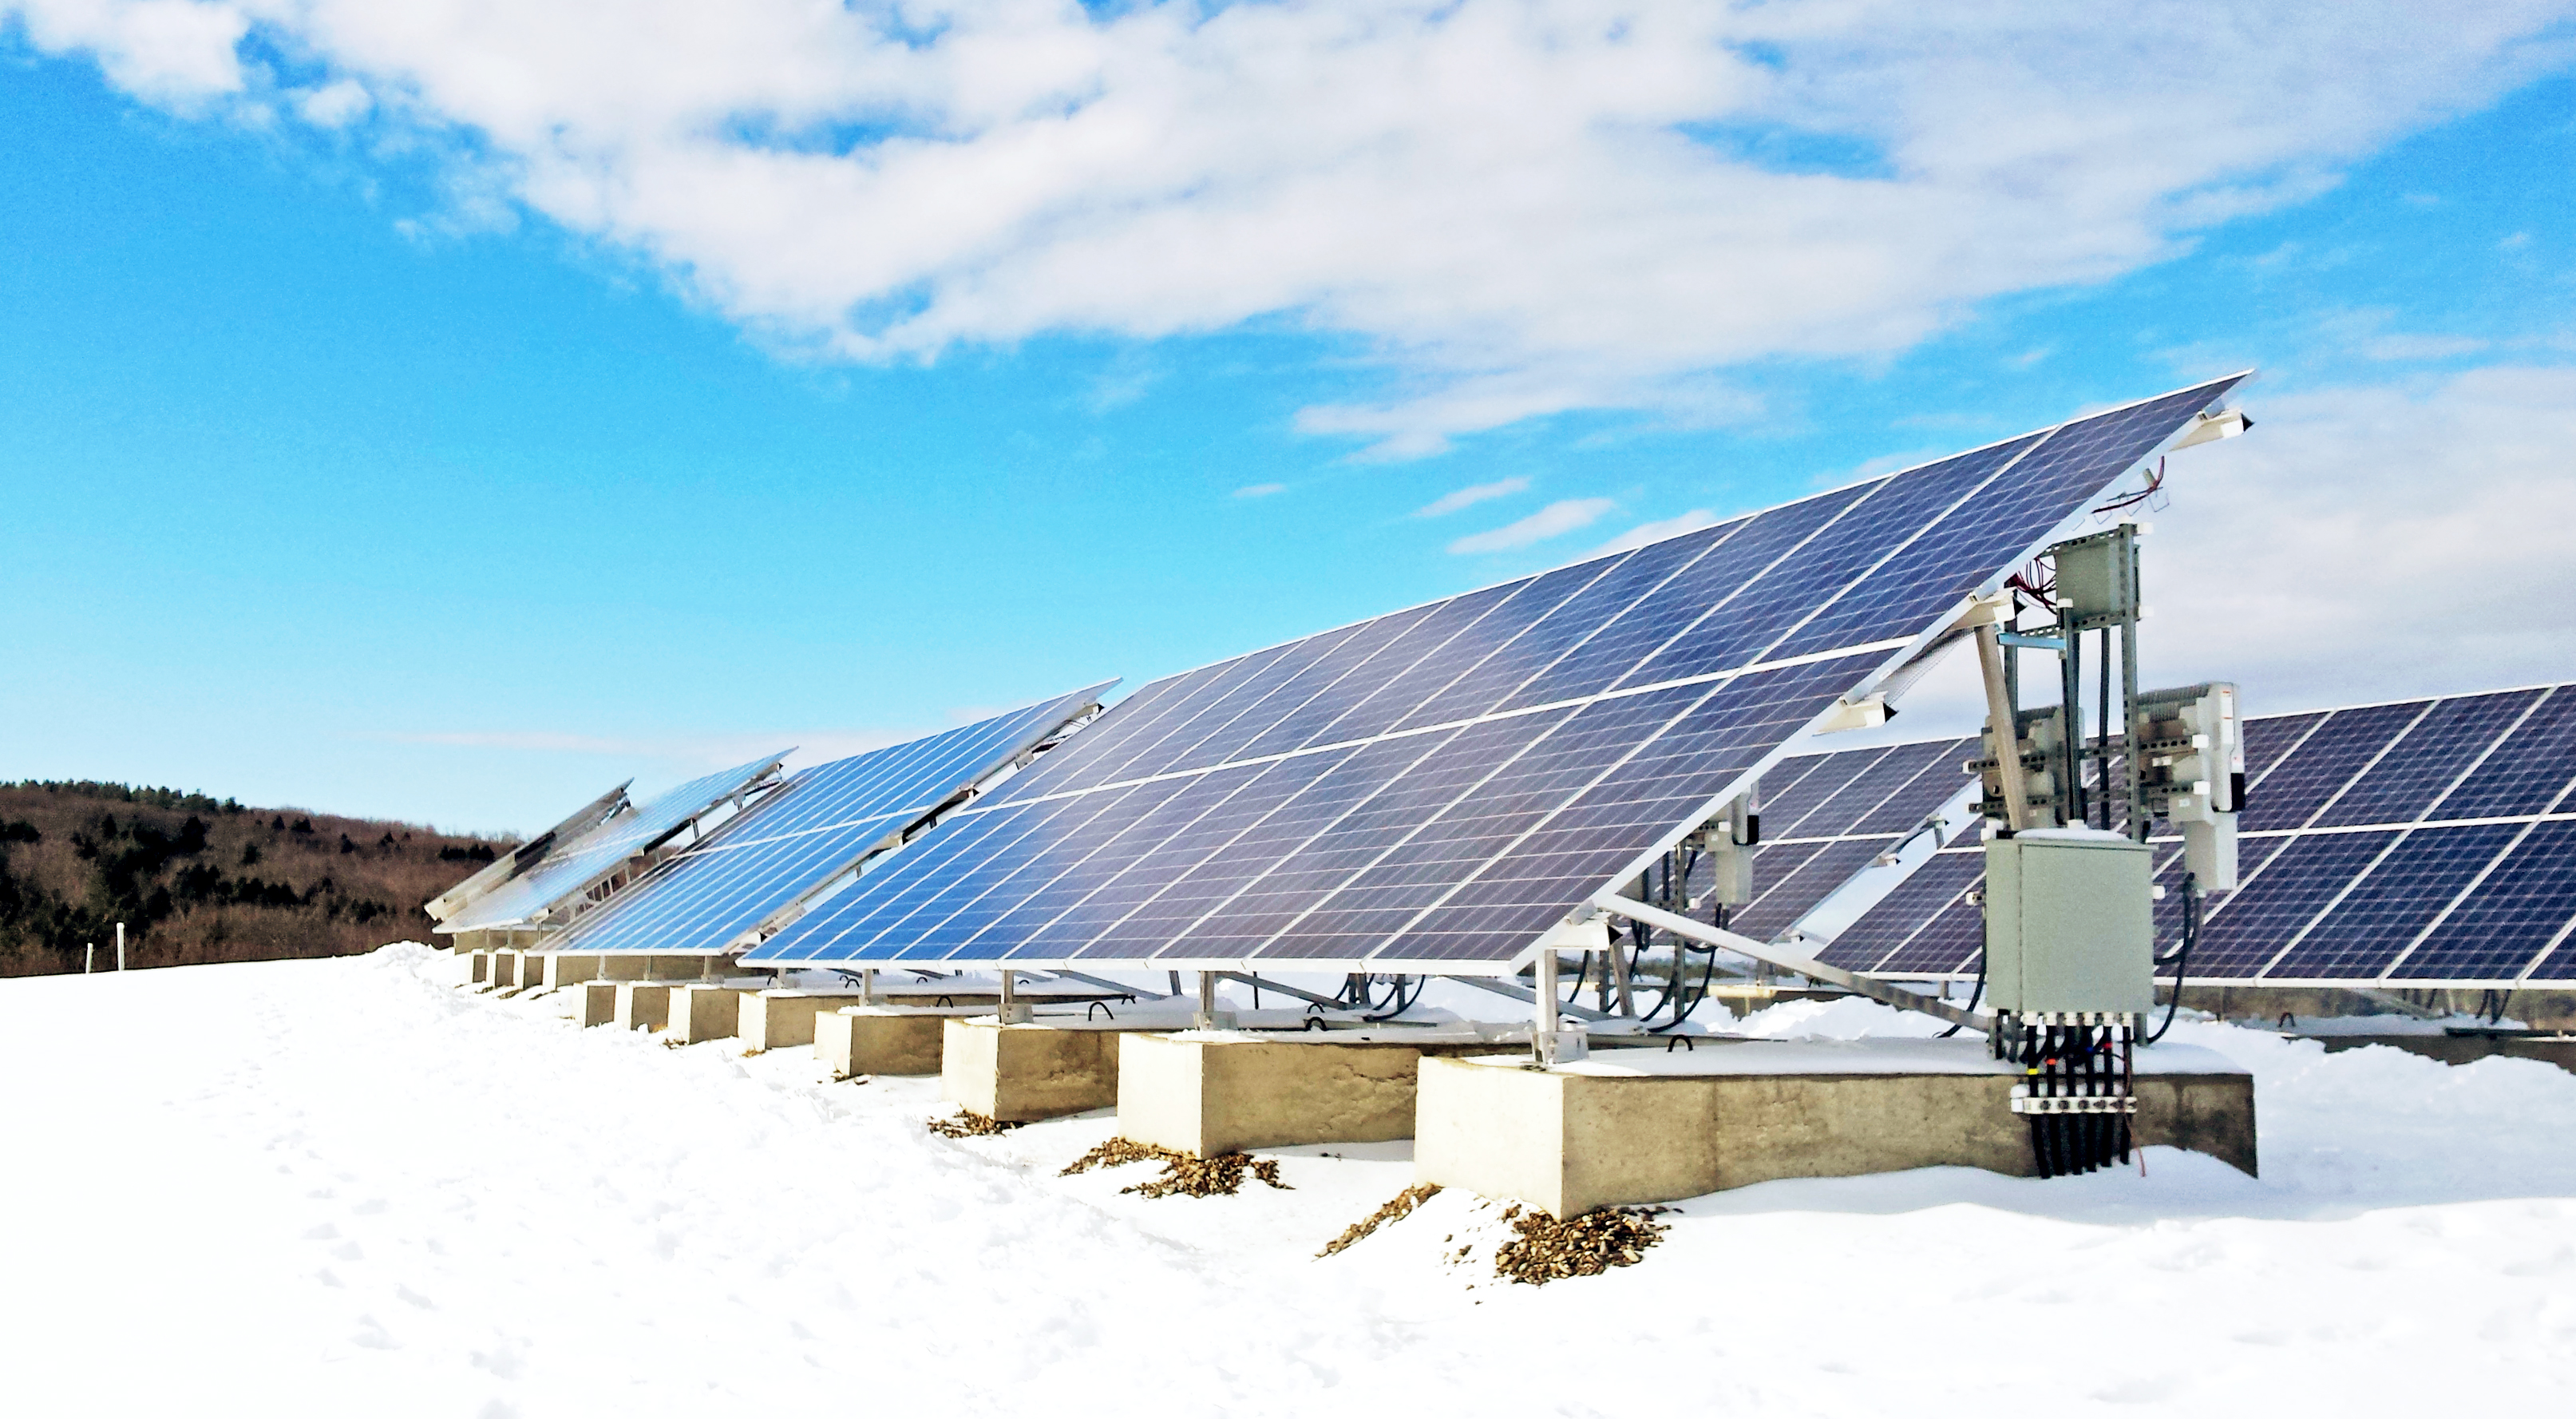 Solar Panels Shed Snow: Even in Winter They Make Power